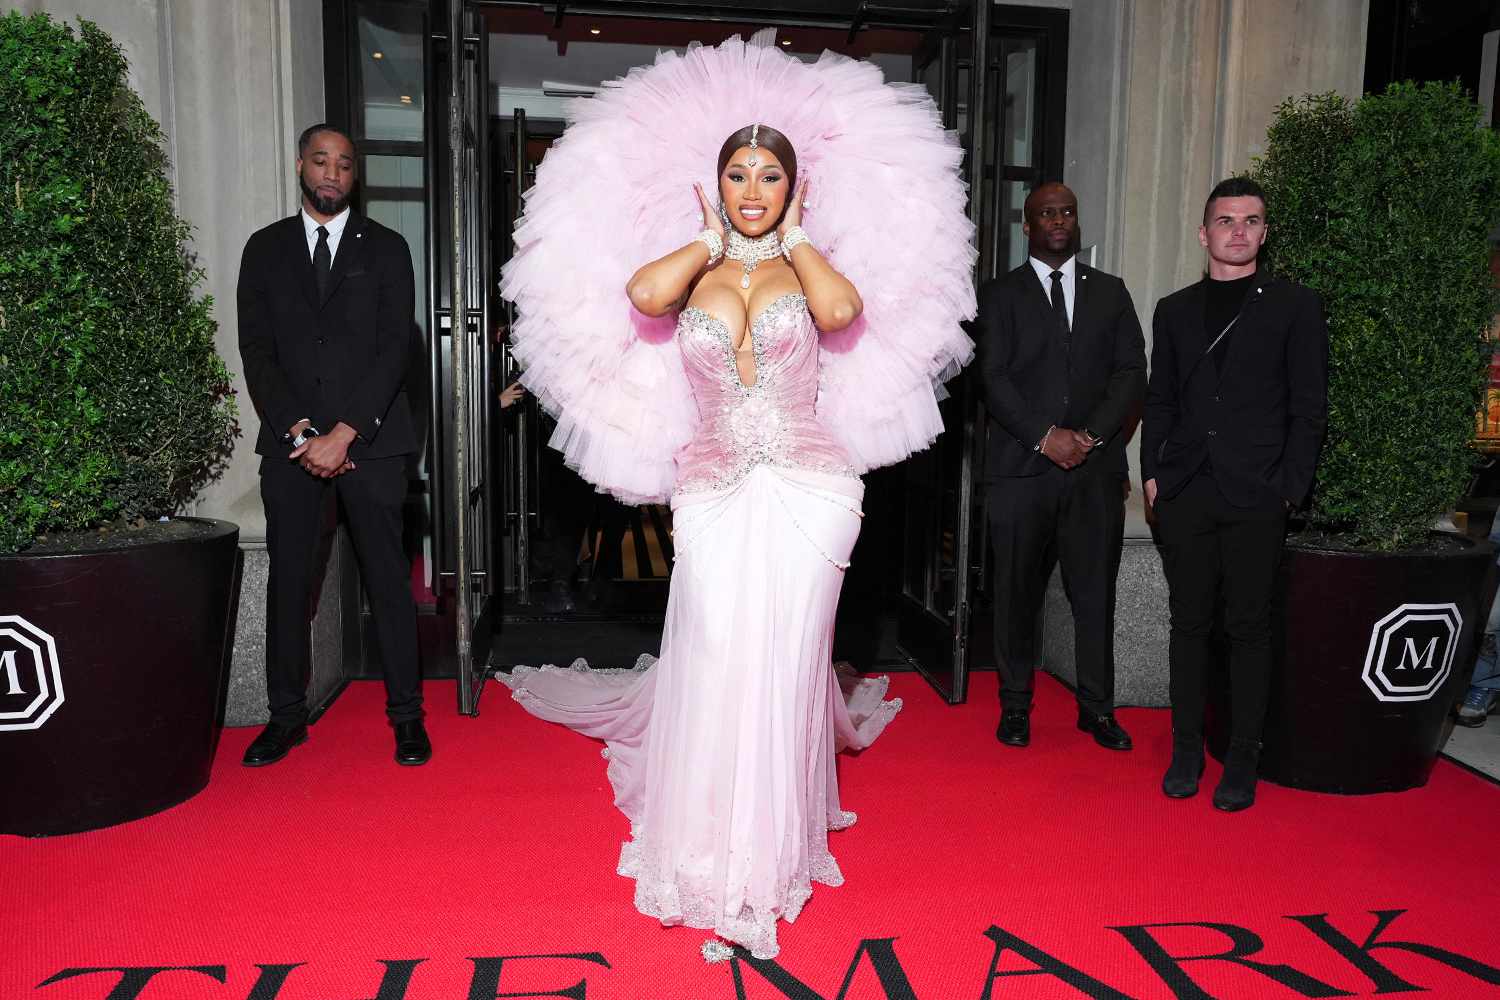 All About The Mark Hotel, Where the Biggest Celebrities Get Glam for the Met Gala